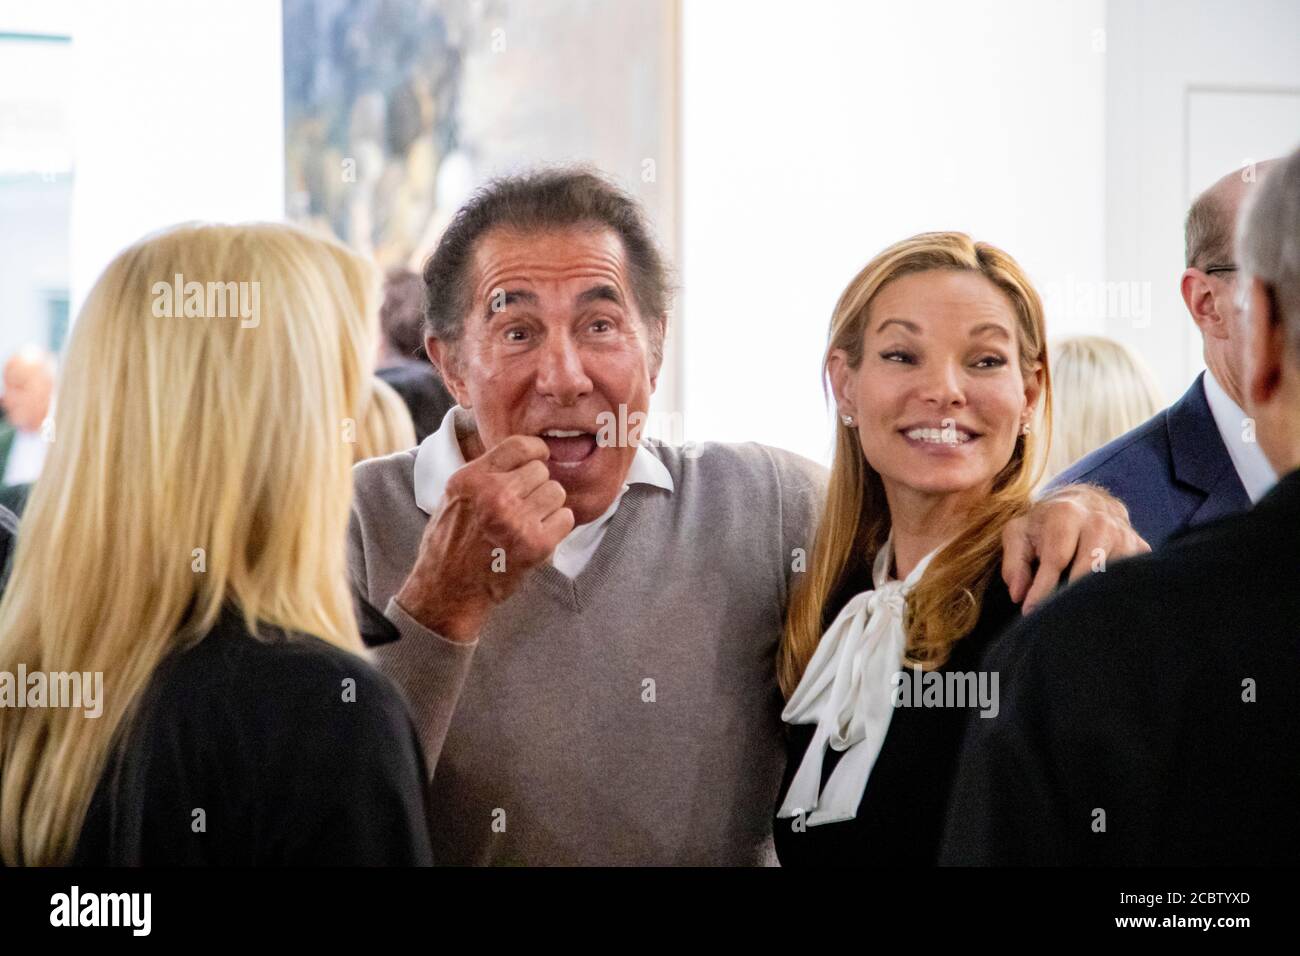 Real Estate investor, Casino mogul, art collector and donor to the Republican Party, Steve Wynn with his wife Andrea Hissom at the 49th annual Art Basel art fair in Basel. Steve Wynn also figured in ' Open Secret', one of the controversial art installations this year, where Andrea Bowers published names, pictures and stories of men caught up in the #metoo and Time's Up movement. Stock Photo